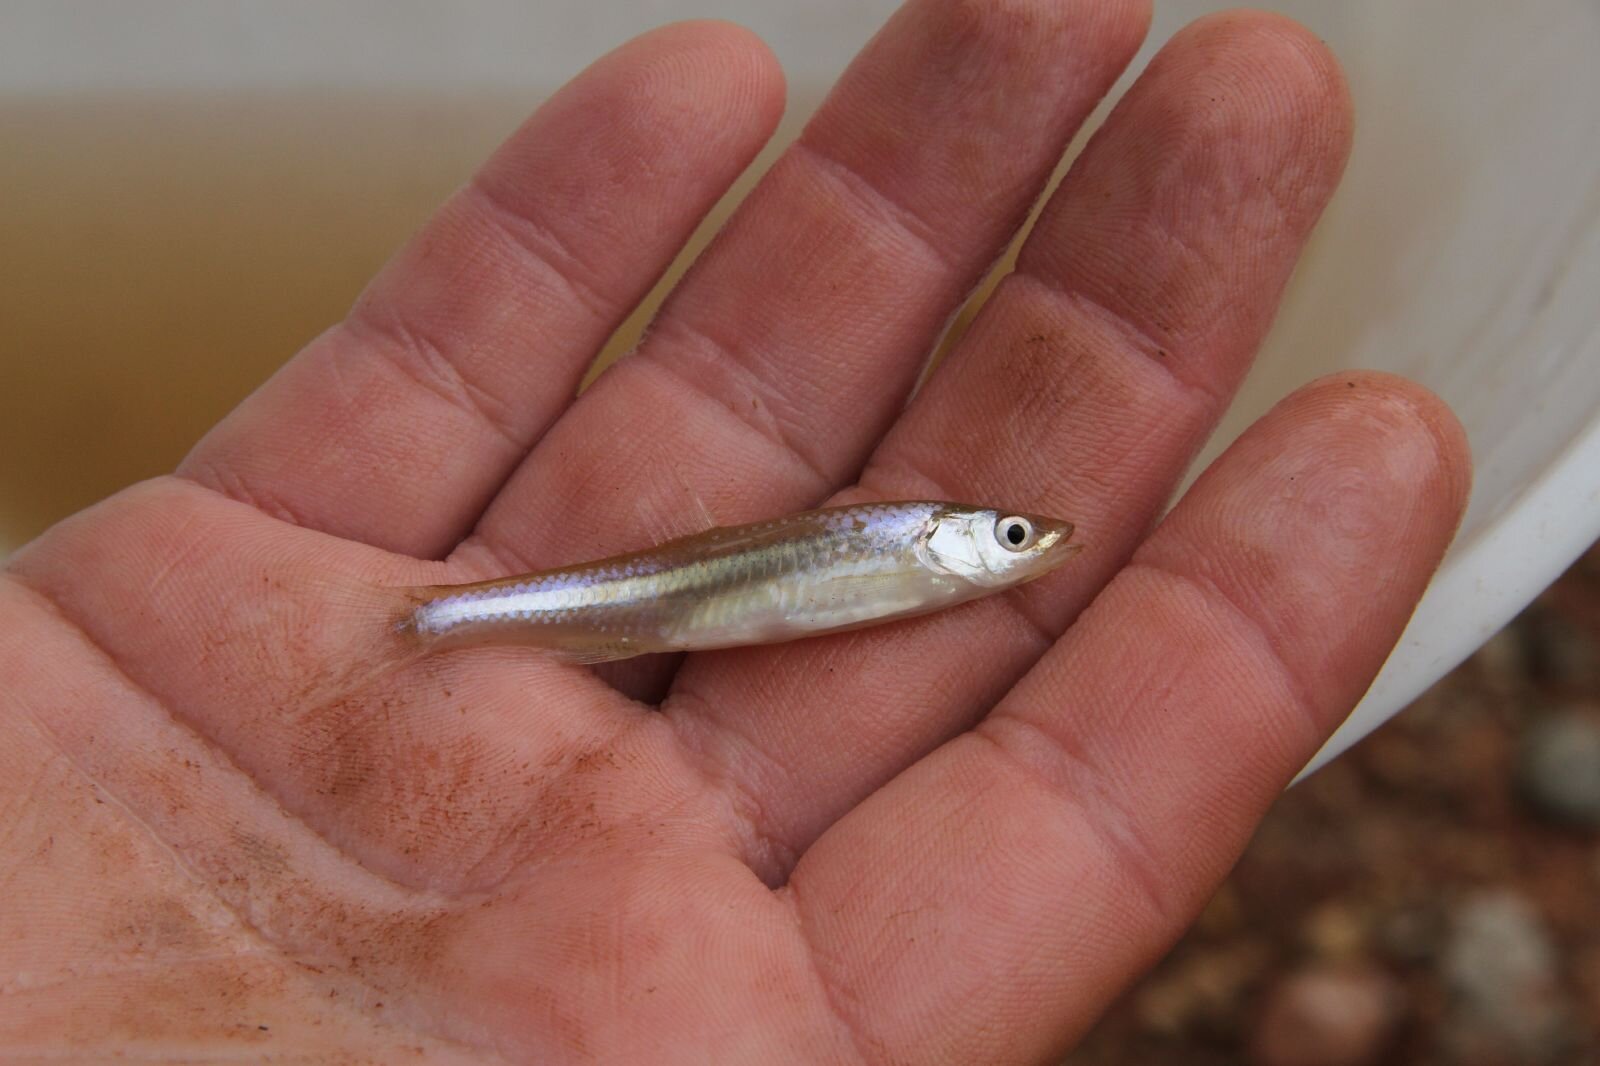 Meet the man trying to save this 'stupid little fish' and see why he thinks it's important